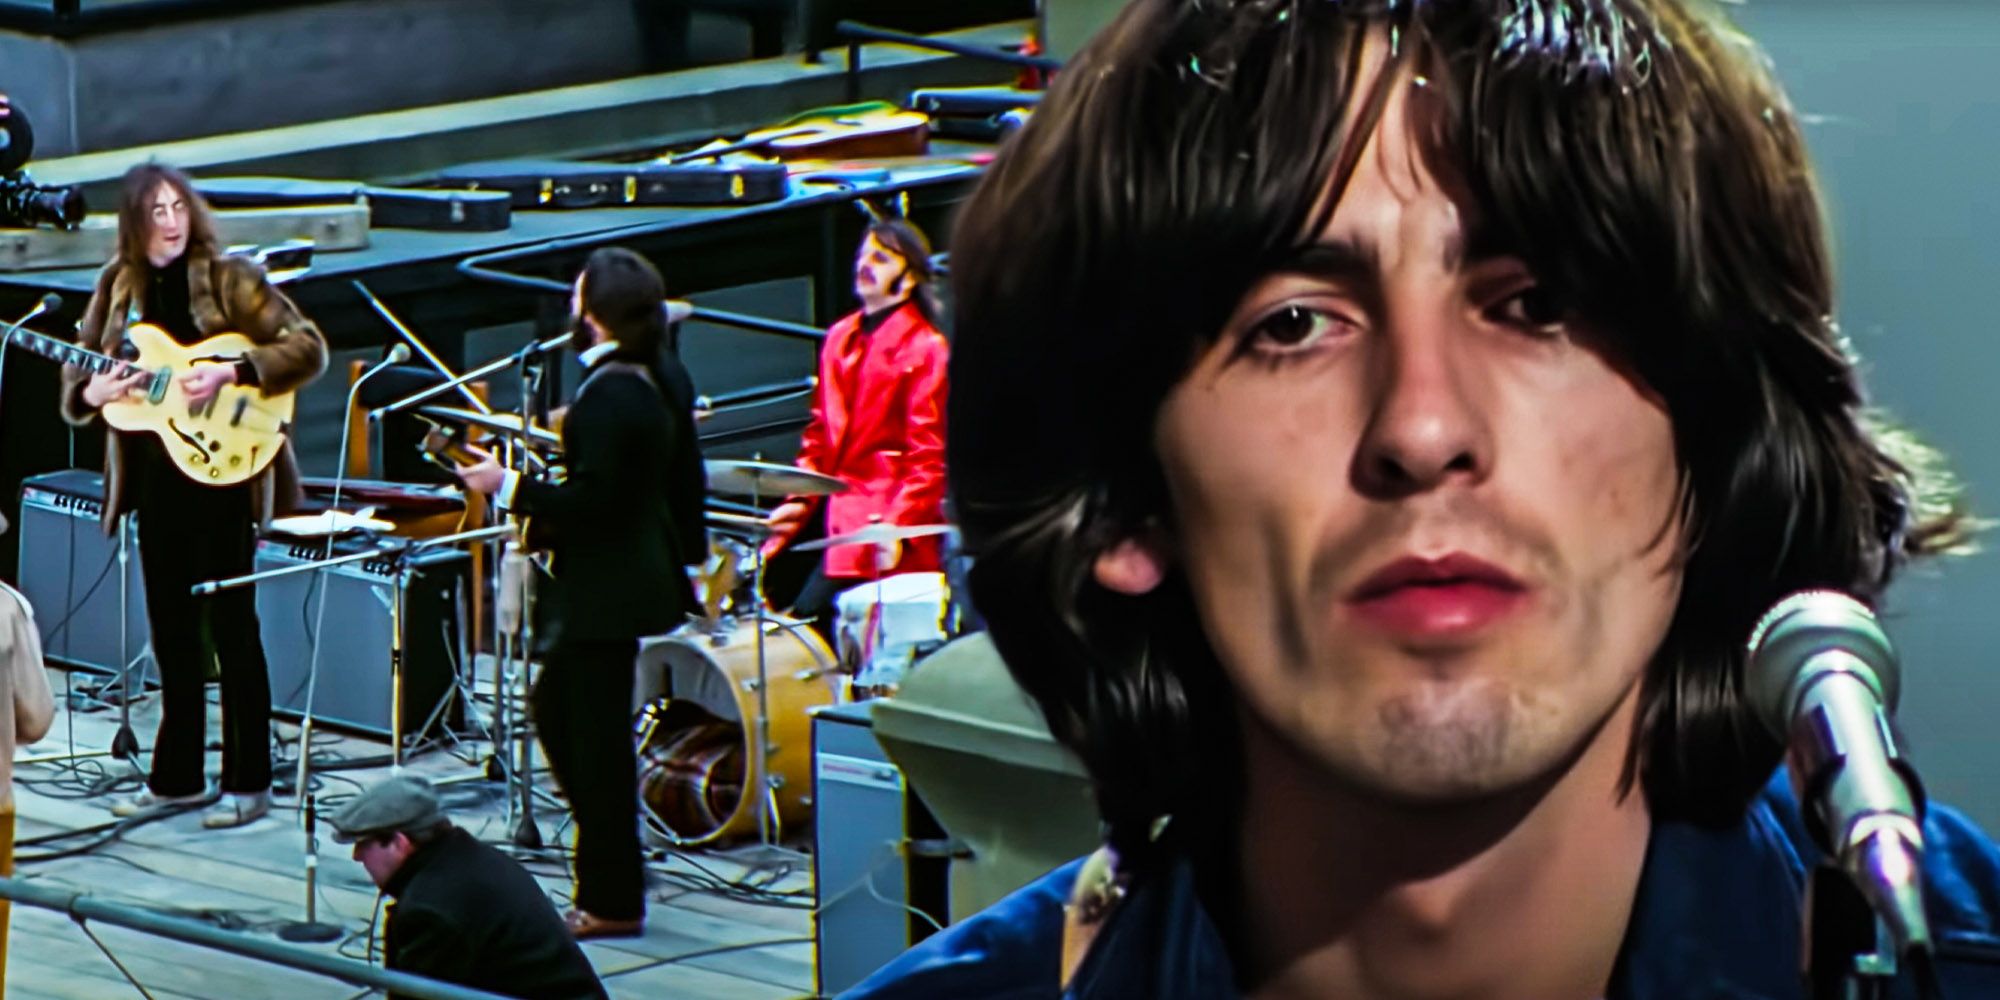 The Beatles with George in the foreground